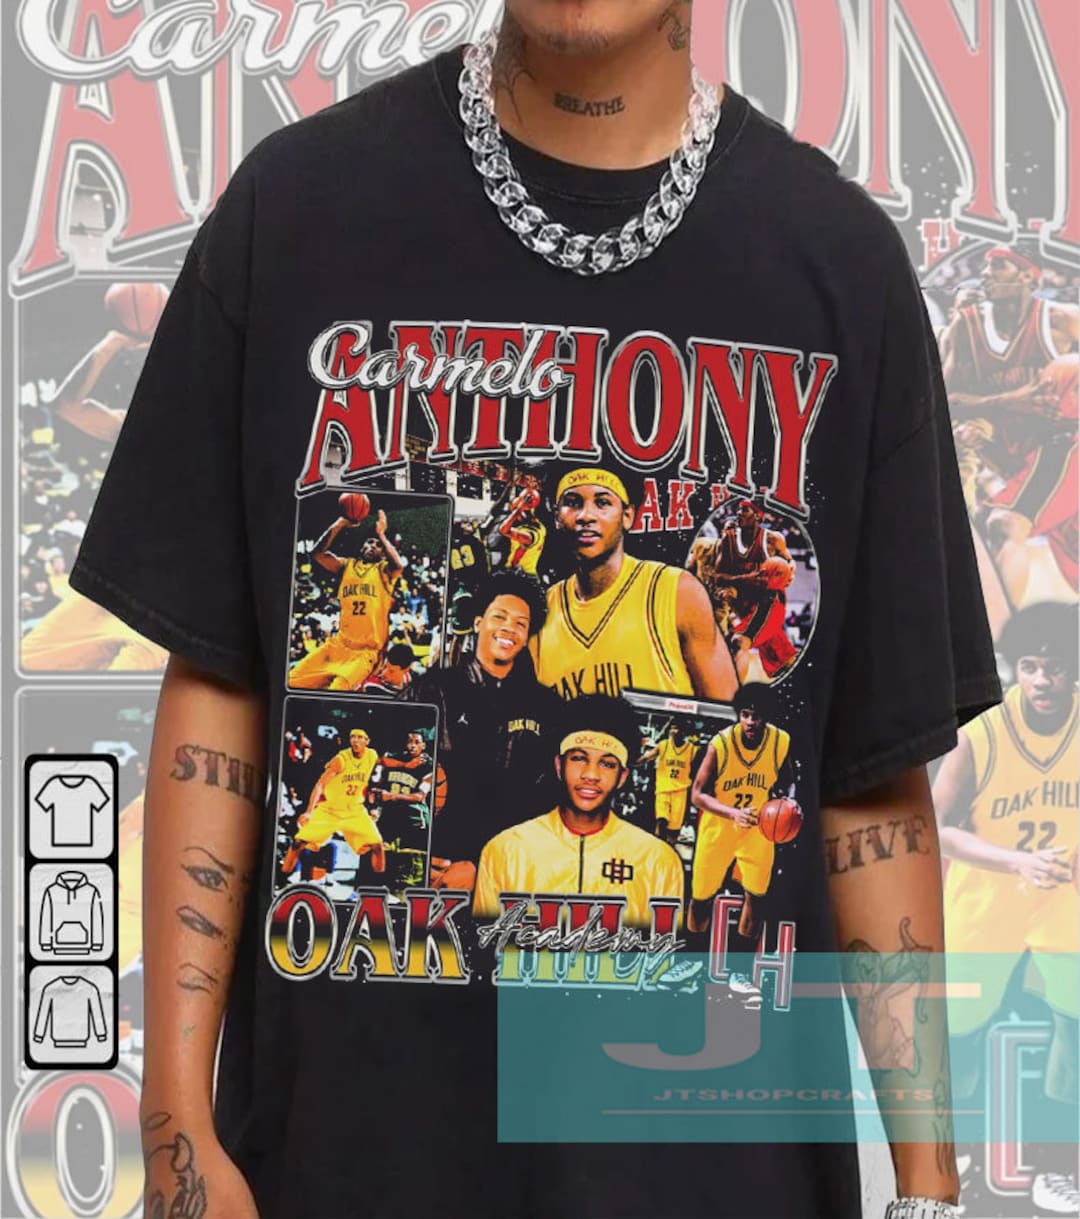 Carmelo Anthony T-Shirts for Sale